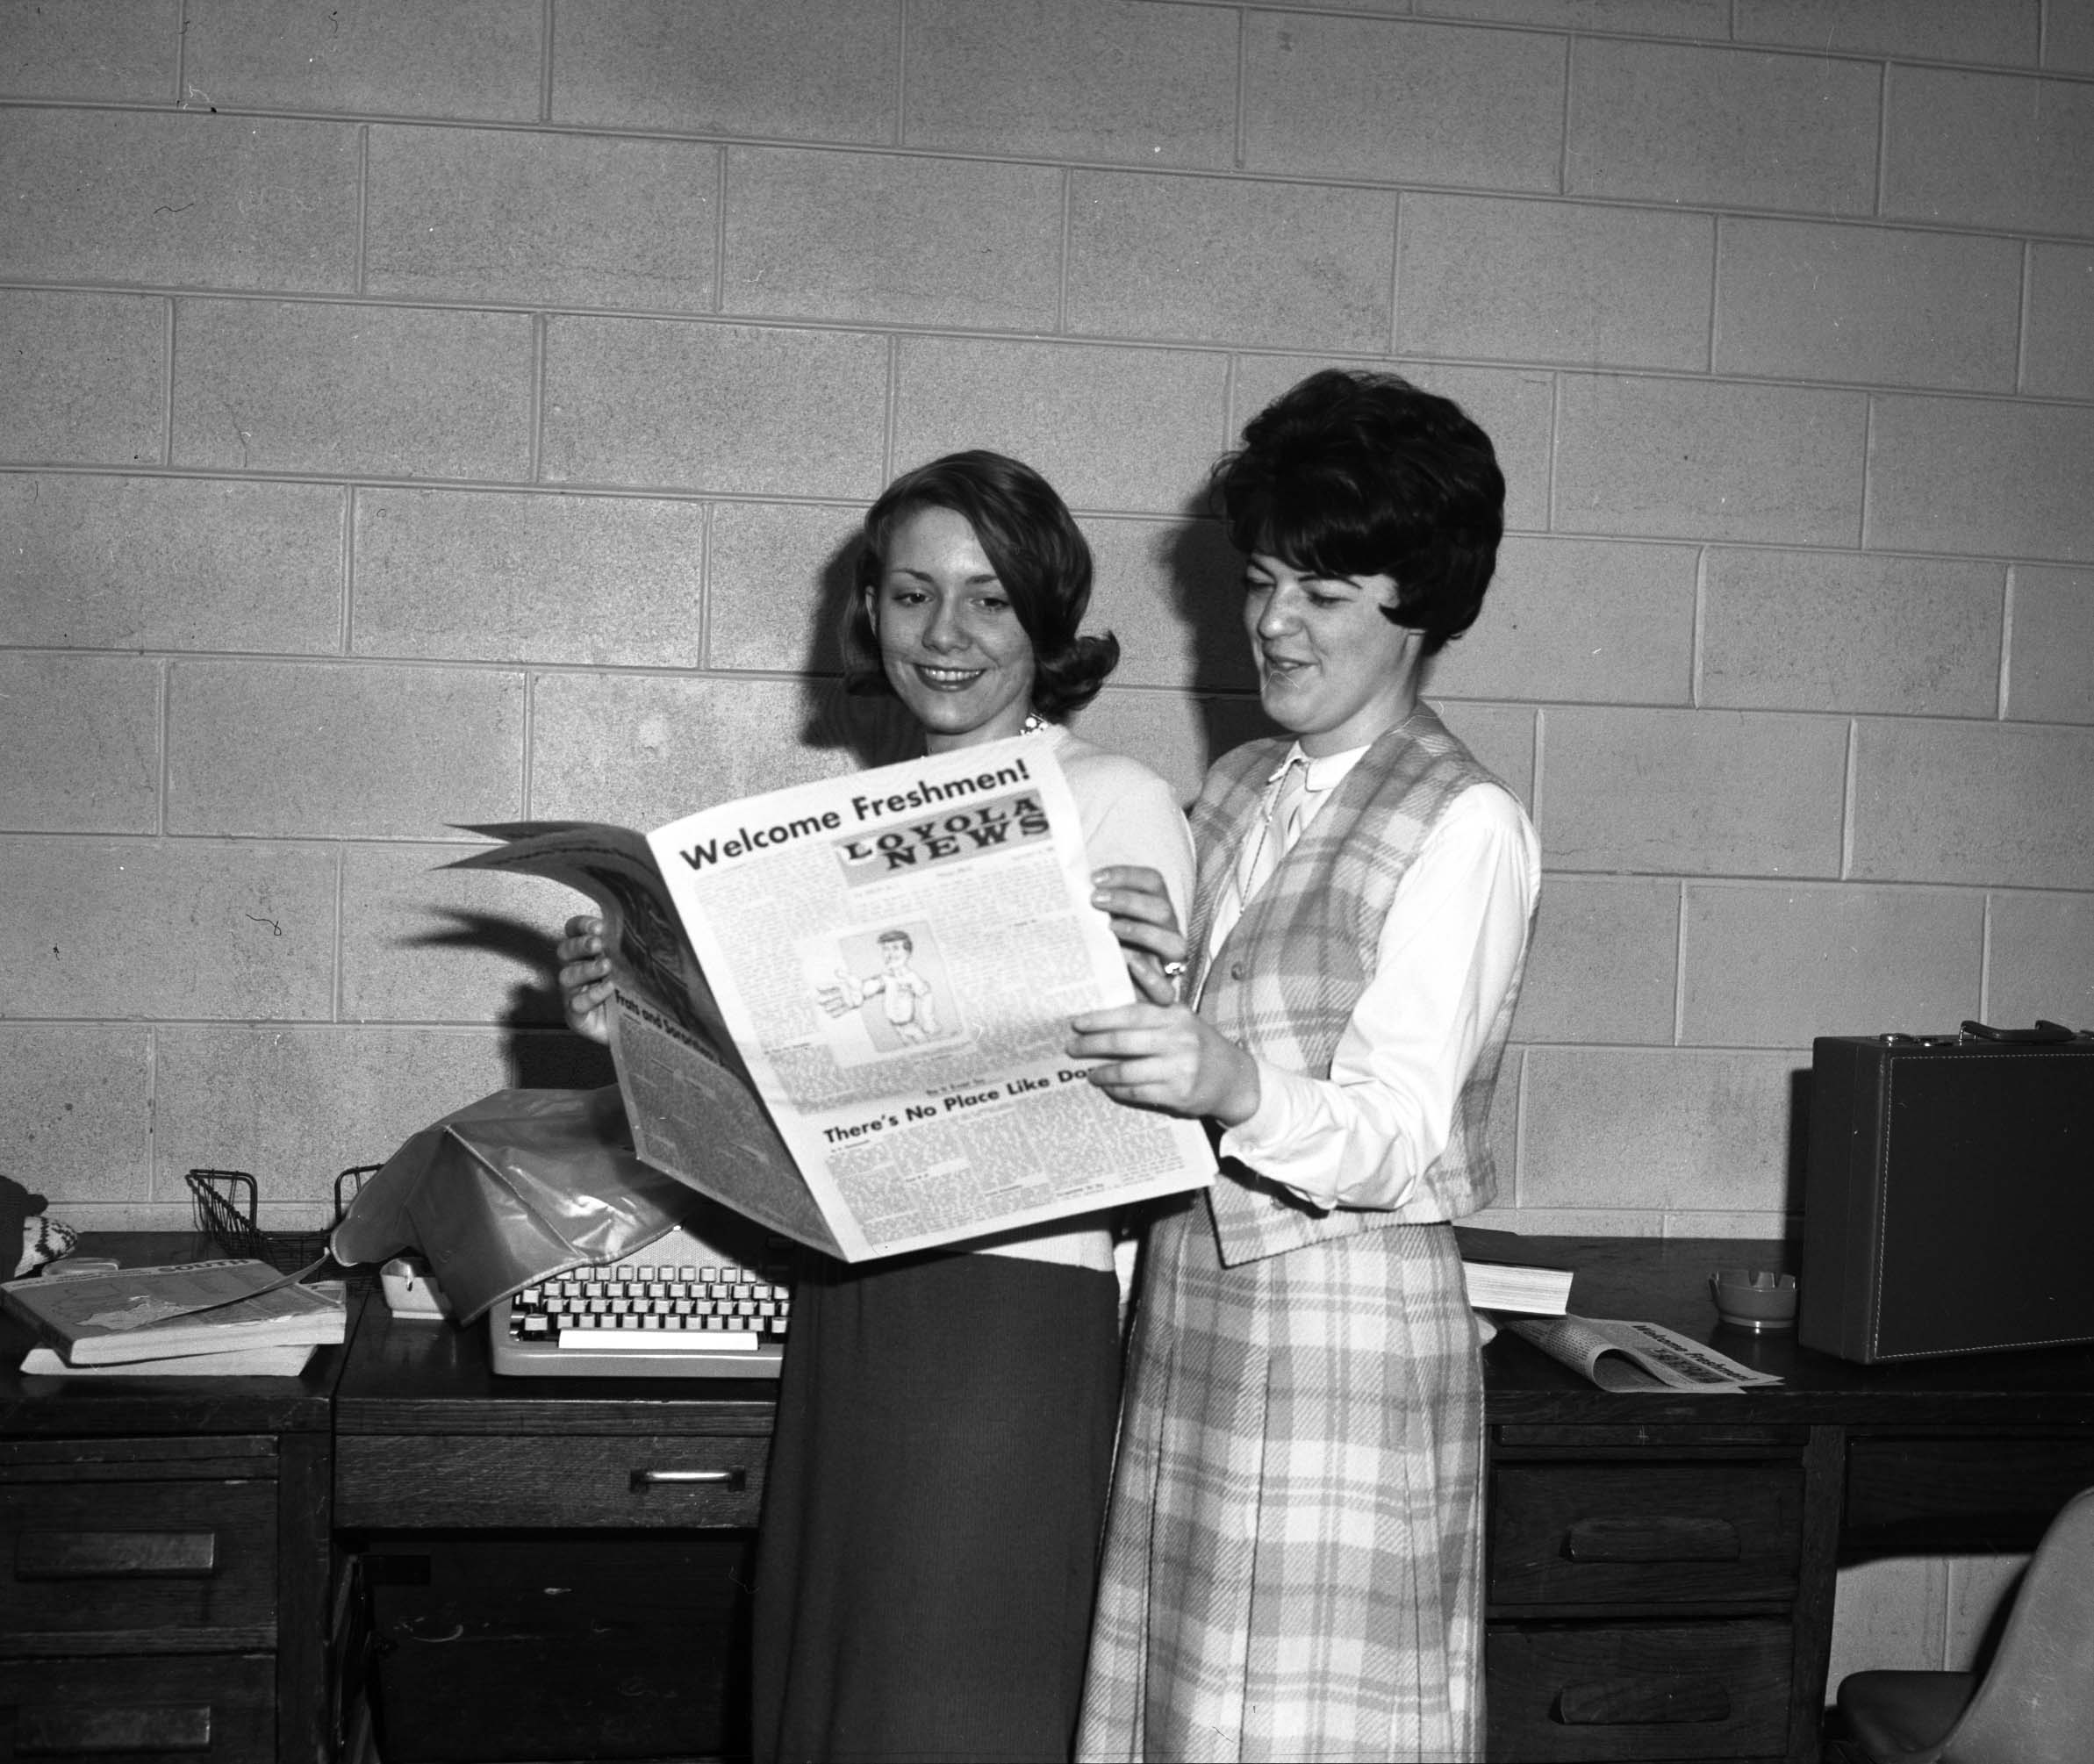 Two Loyola News staffers with first issue of the year